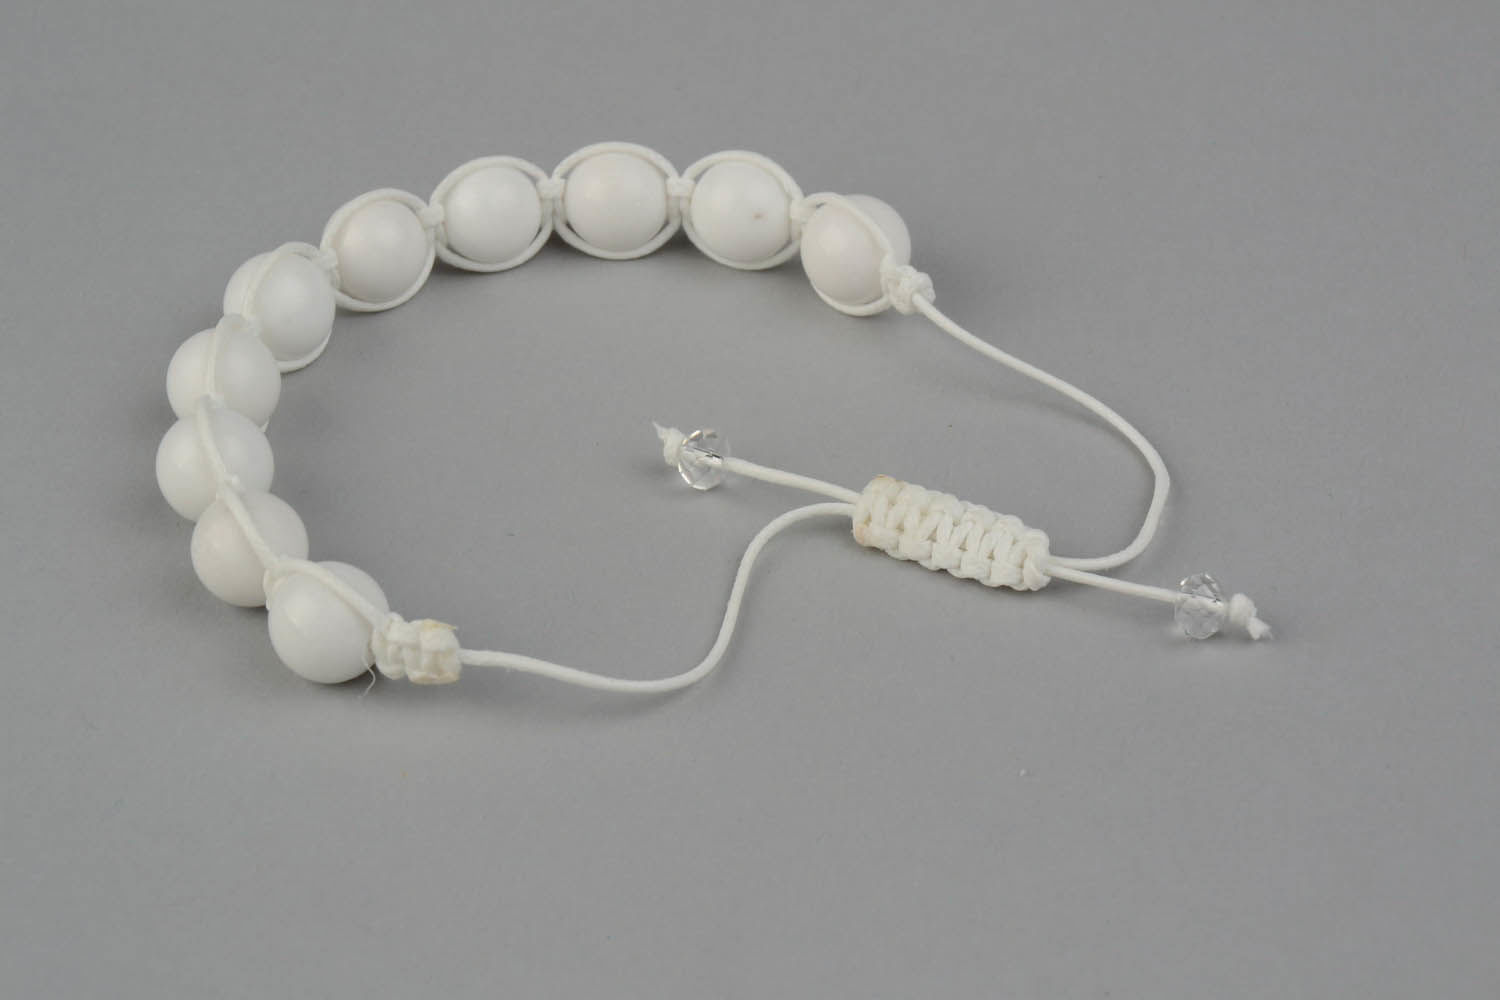 Wrist bracelet with white agate crumbs photo 4